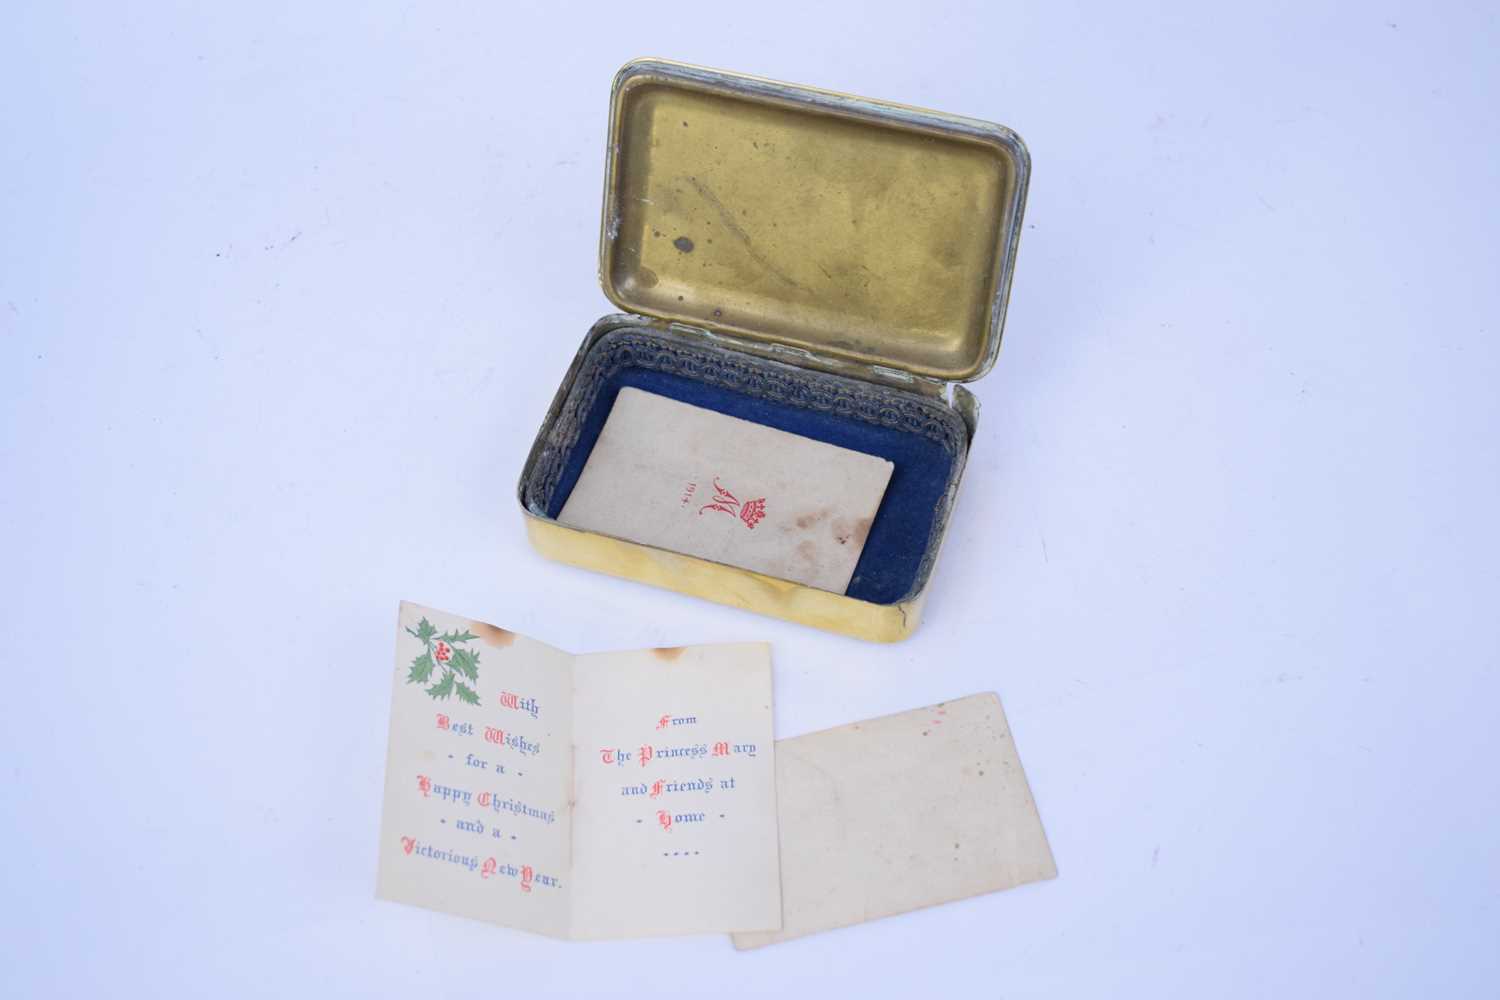 WWI 1914 Christmas tin with Christmas greeting card to the interior - Image 3 of 3